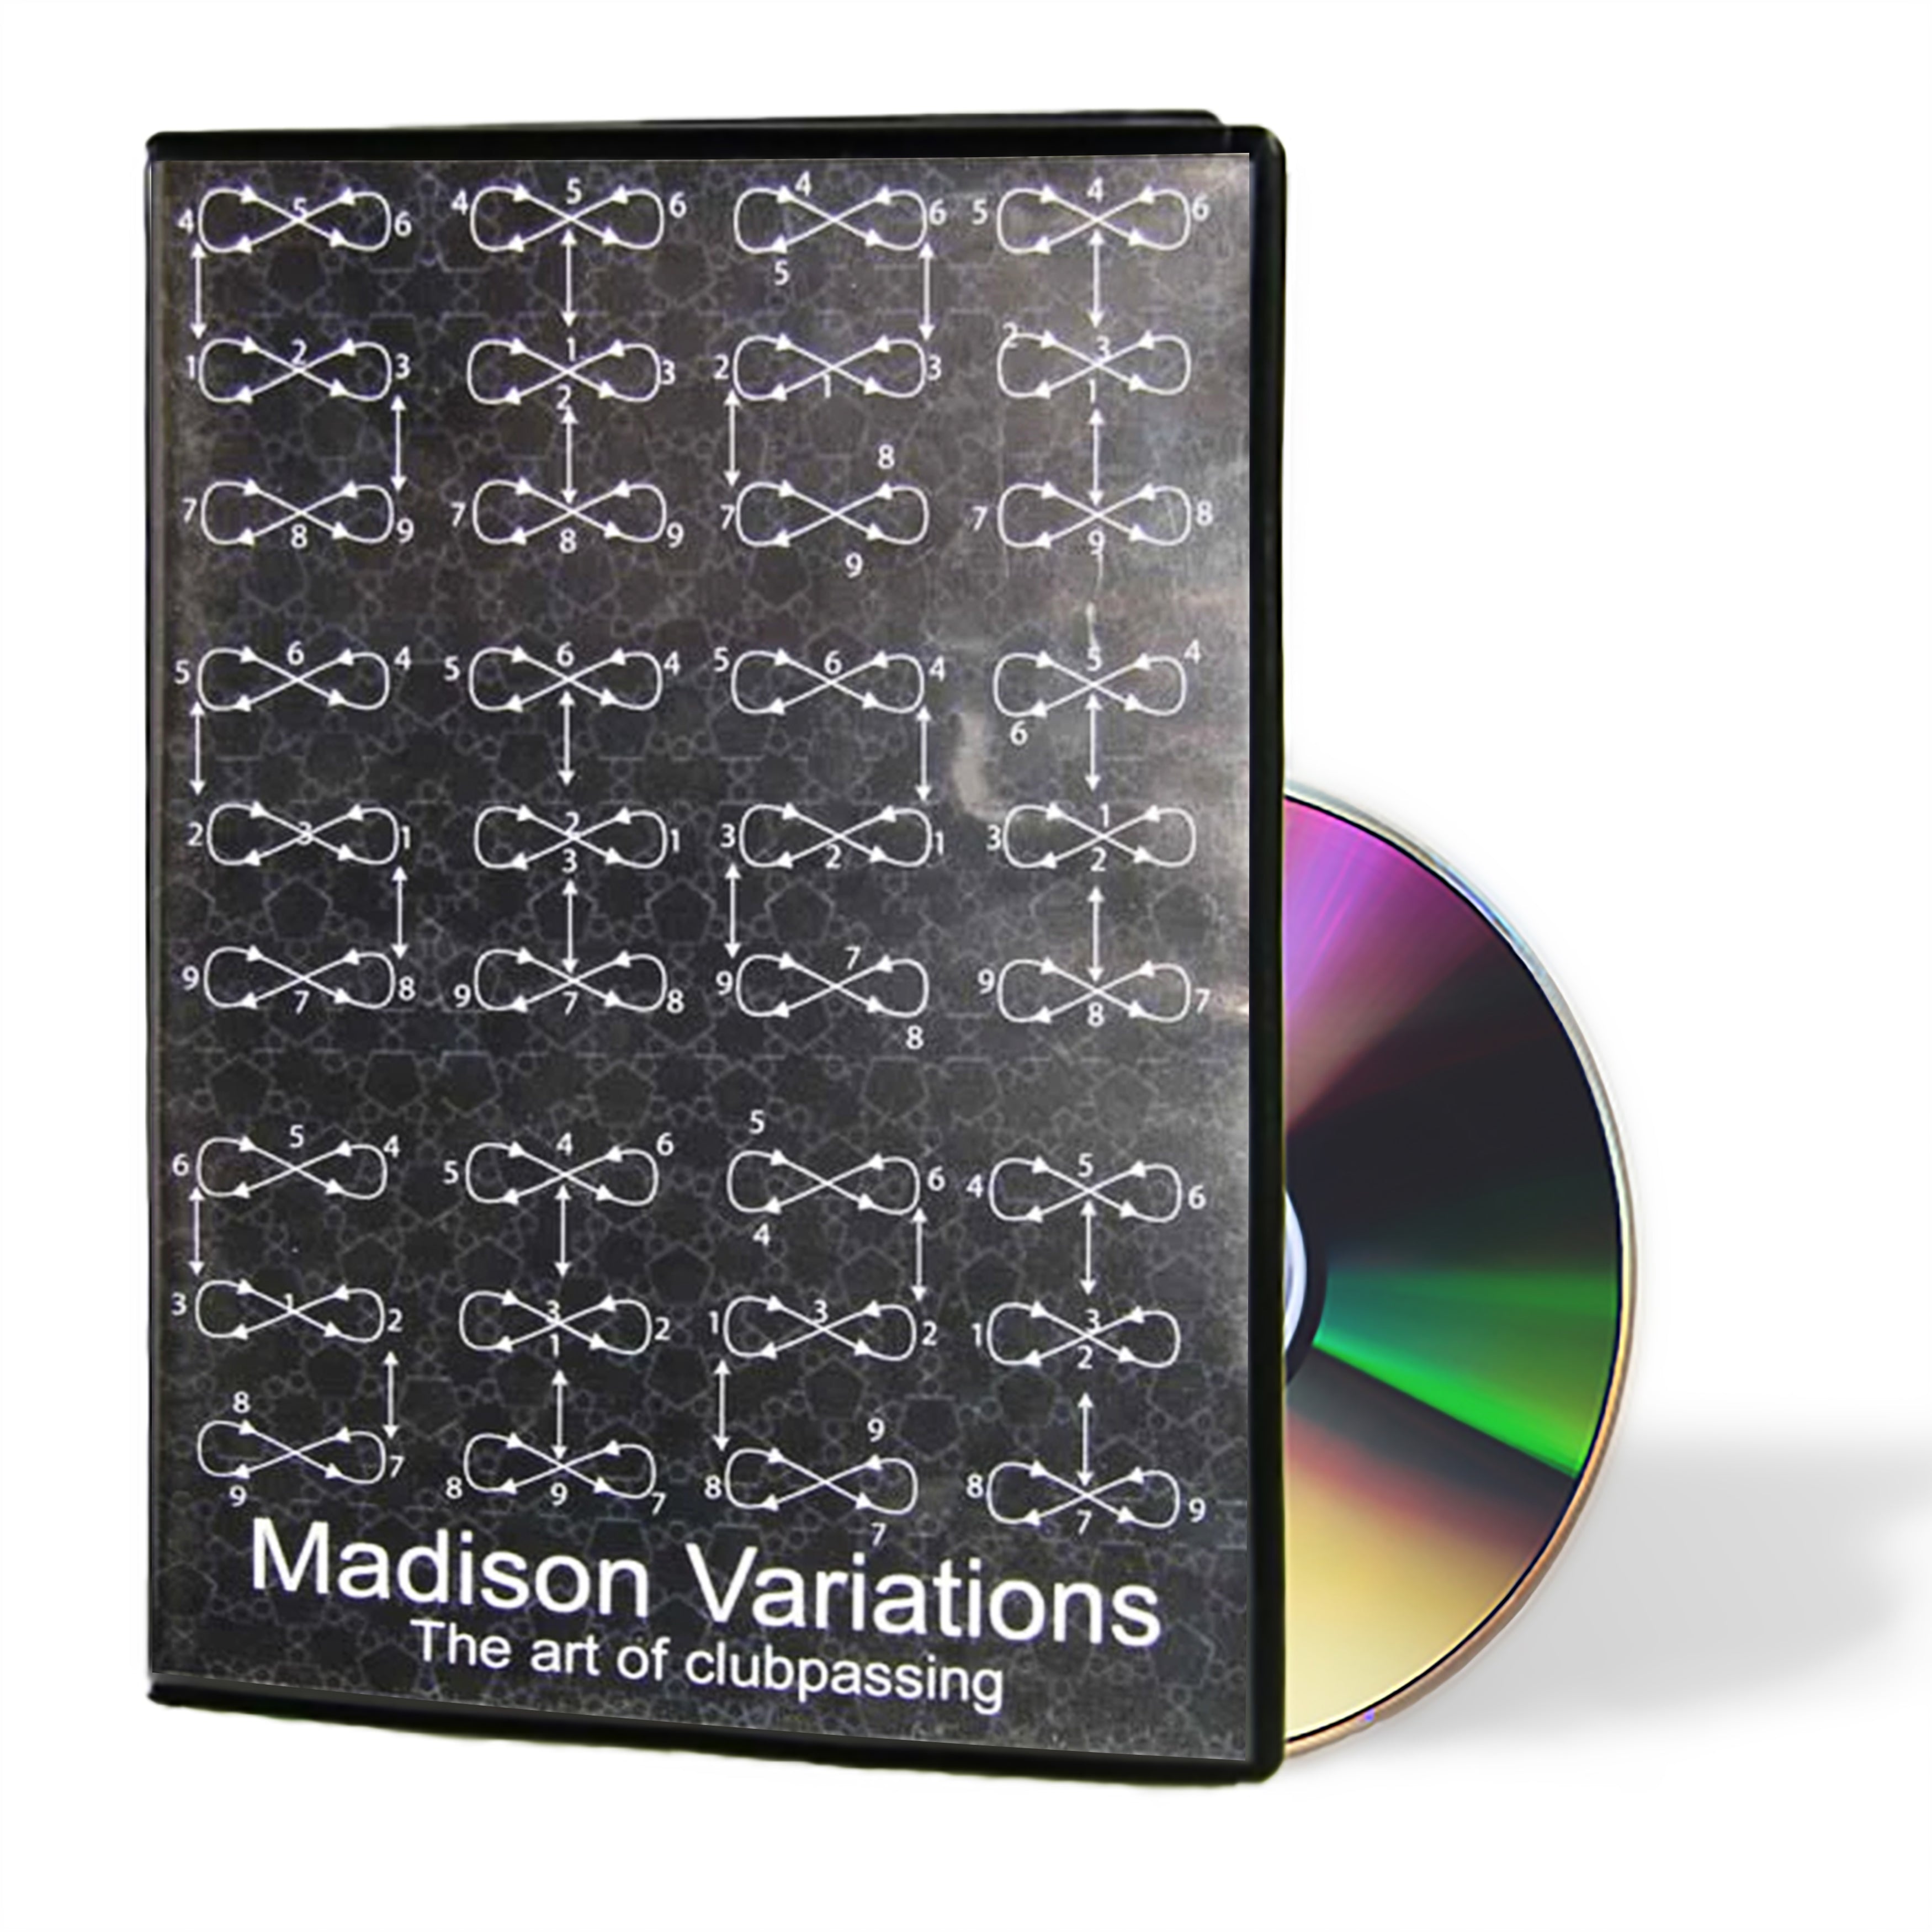 Madison Variations - The Art of Club Passing (Juggling DVD)